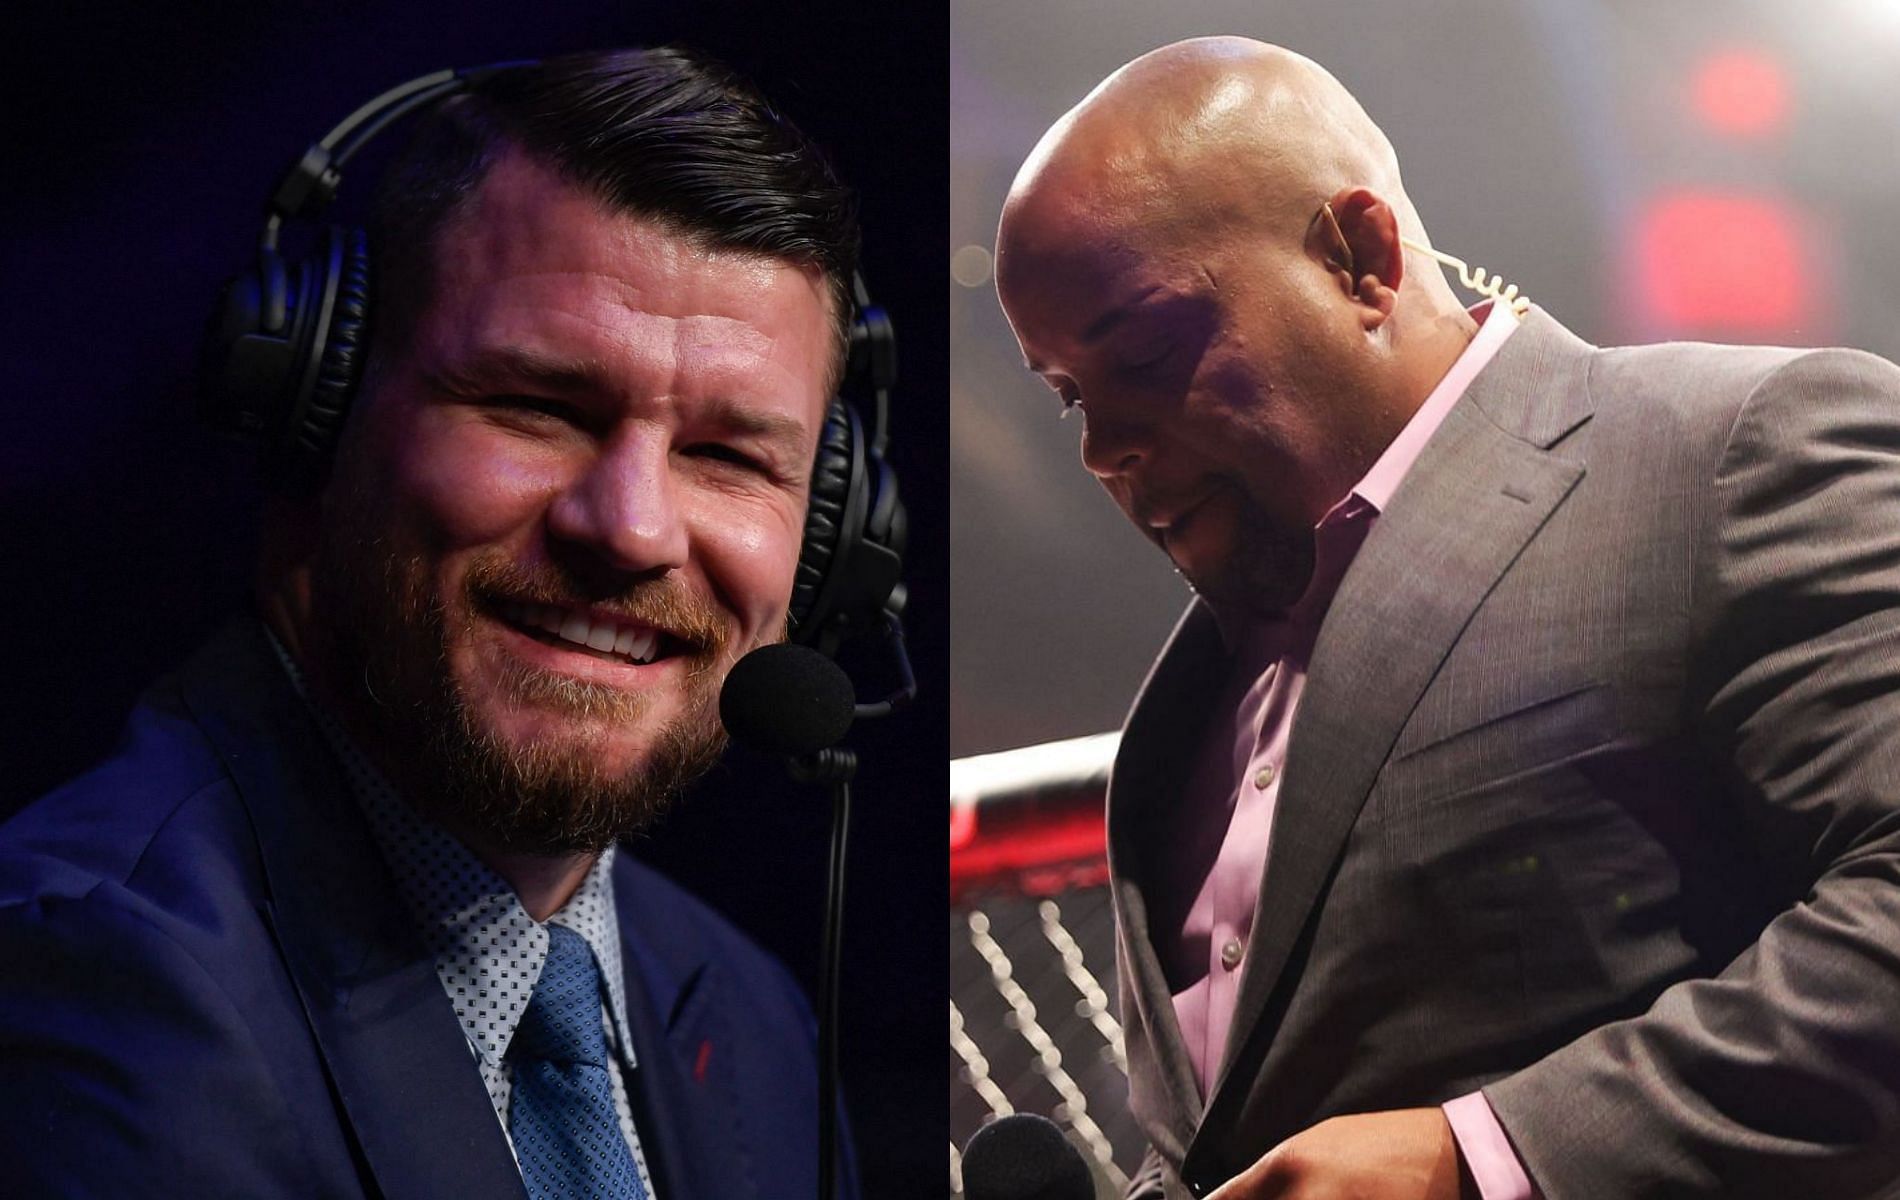 Michael Bisping (left) &amp; Daniel Cormier (right)